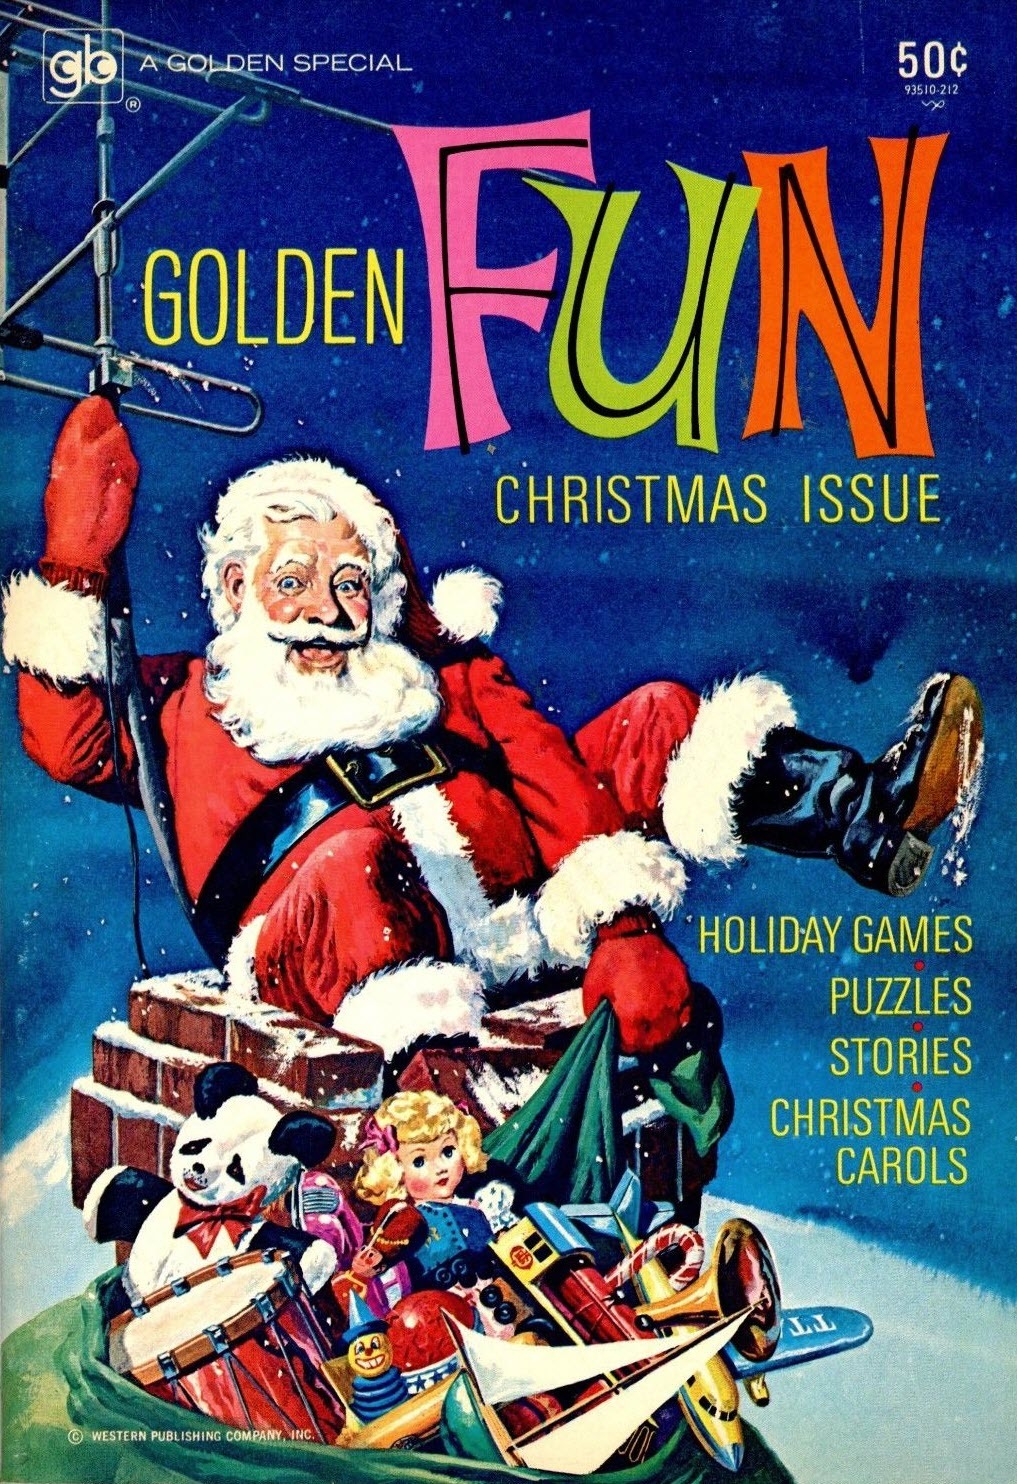 Golden Fun - published in 1972